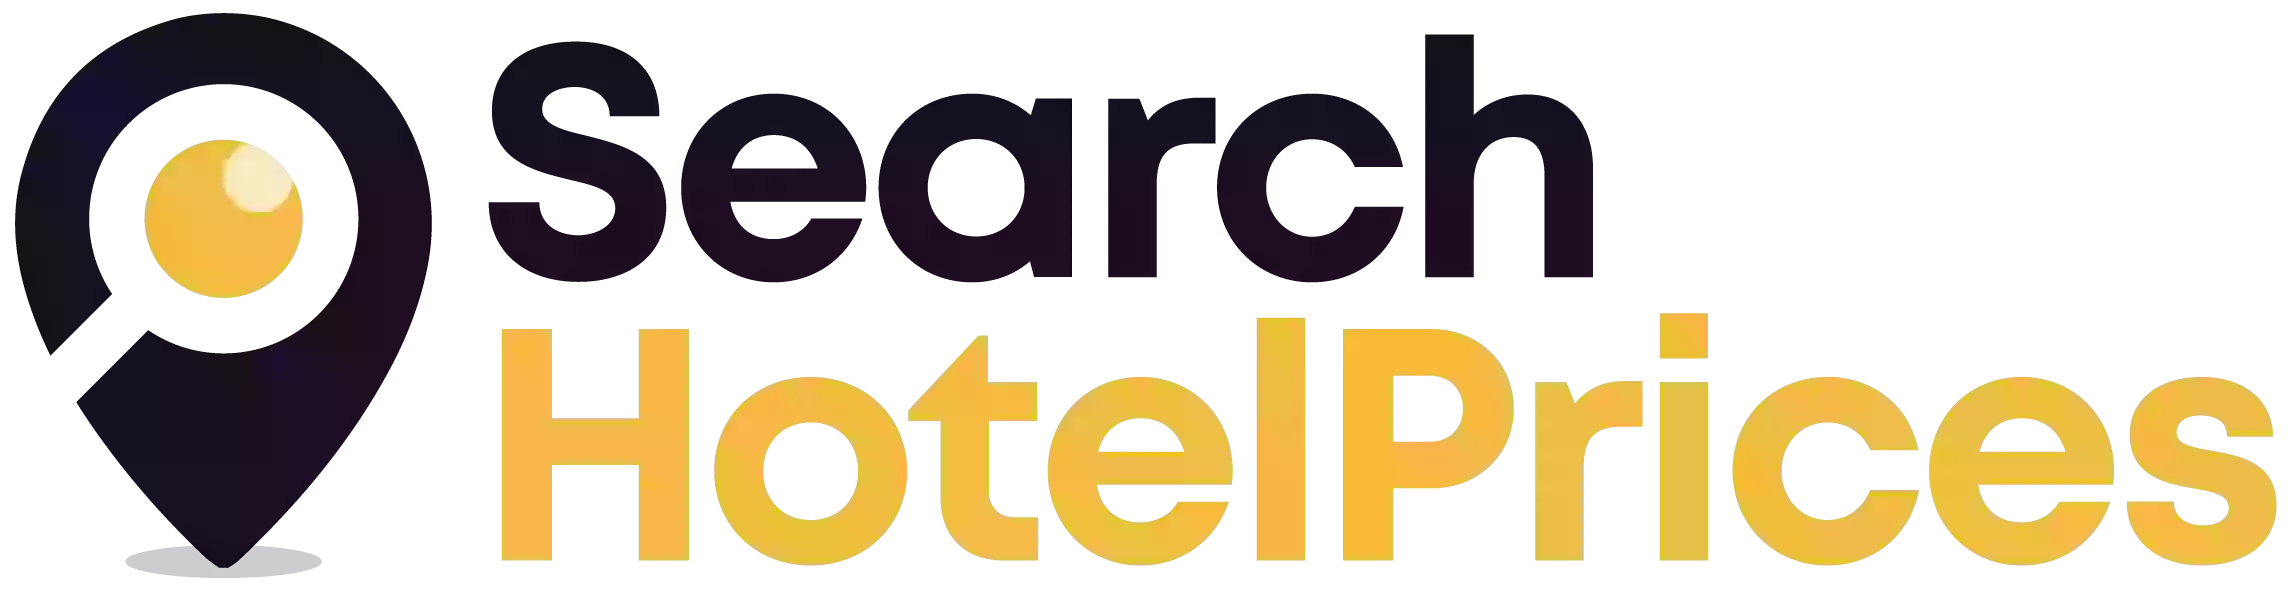 Search Hotel Prices